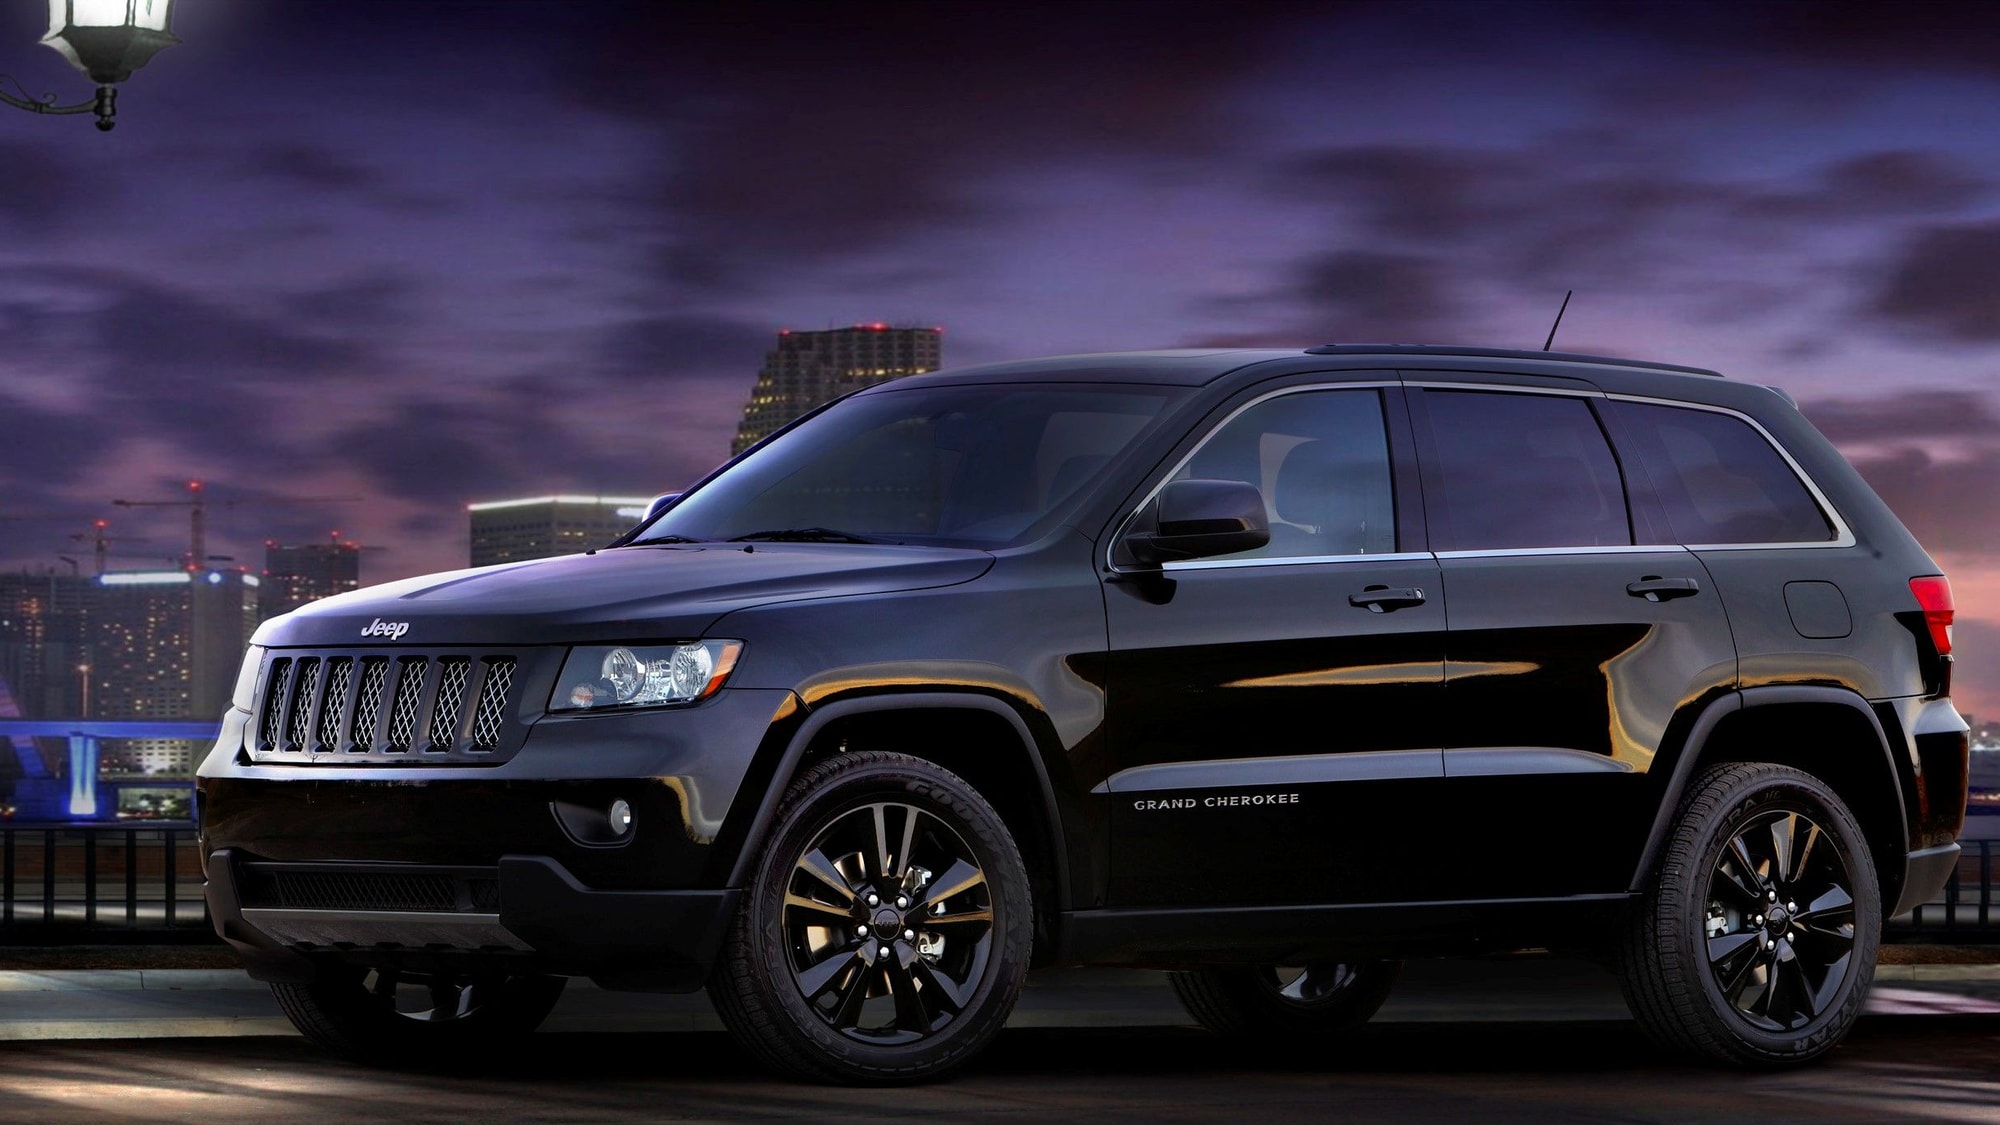 2012 Jeep Altitude editions of Grand Cherokee, Compass, and Patriot